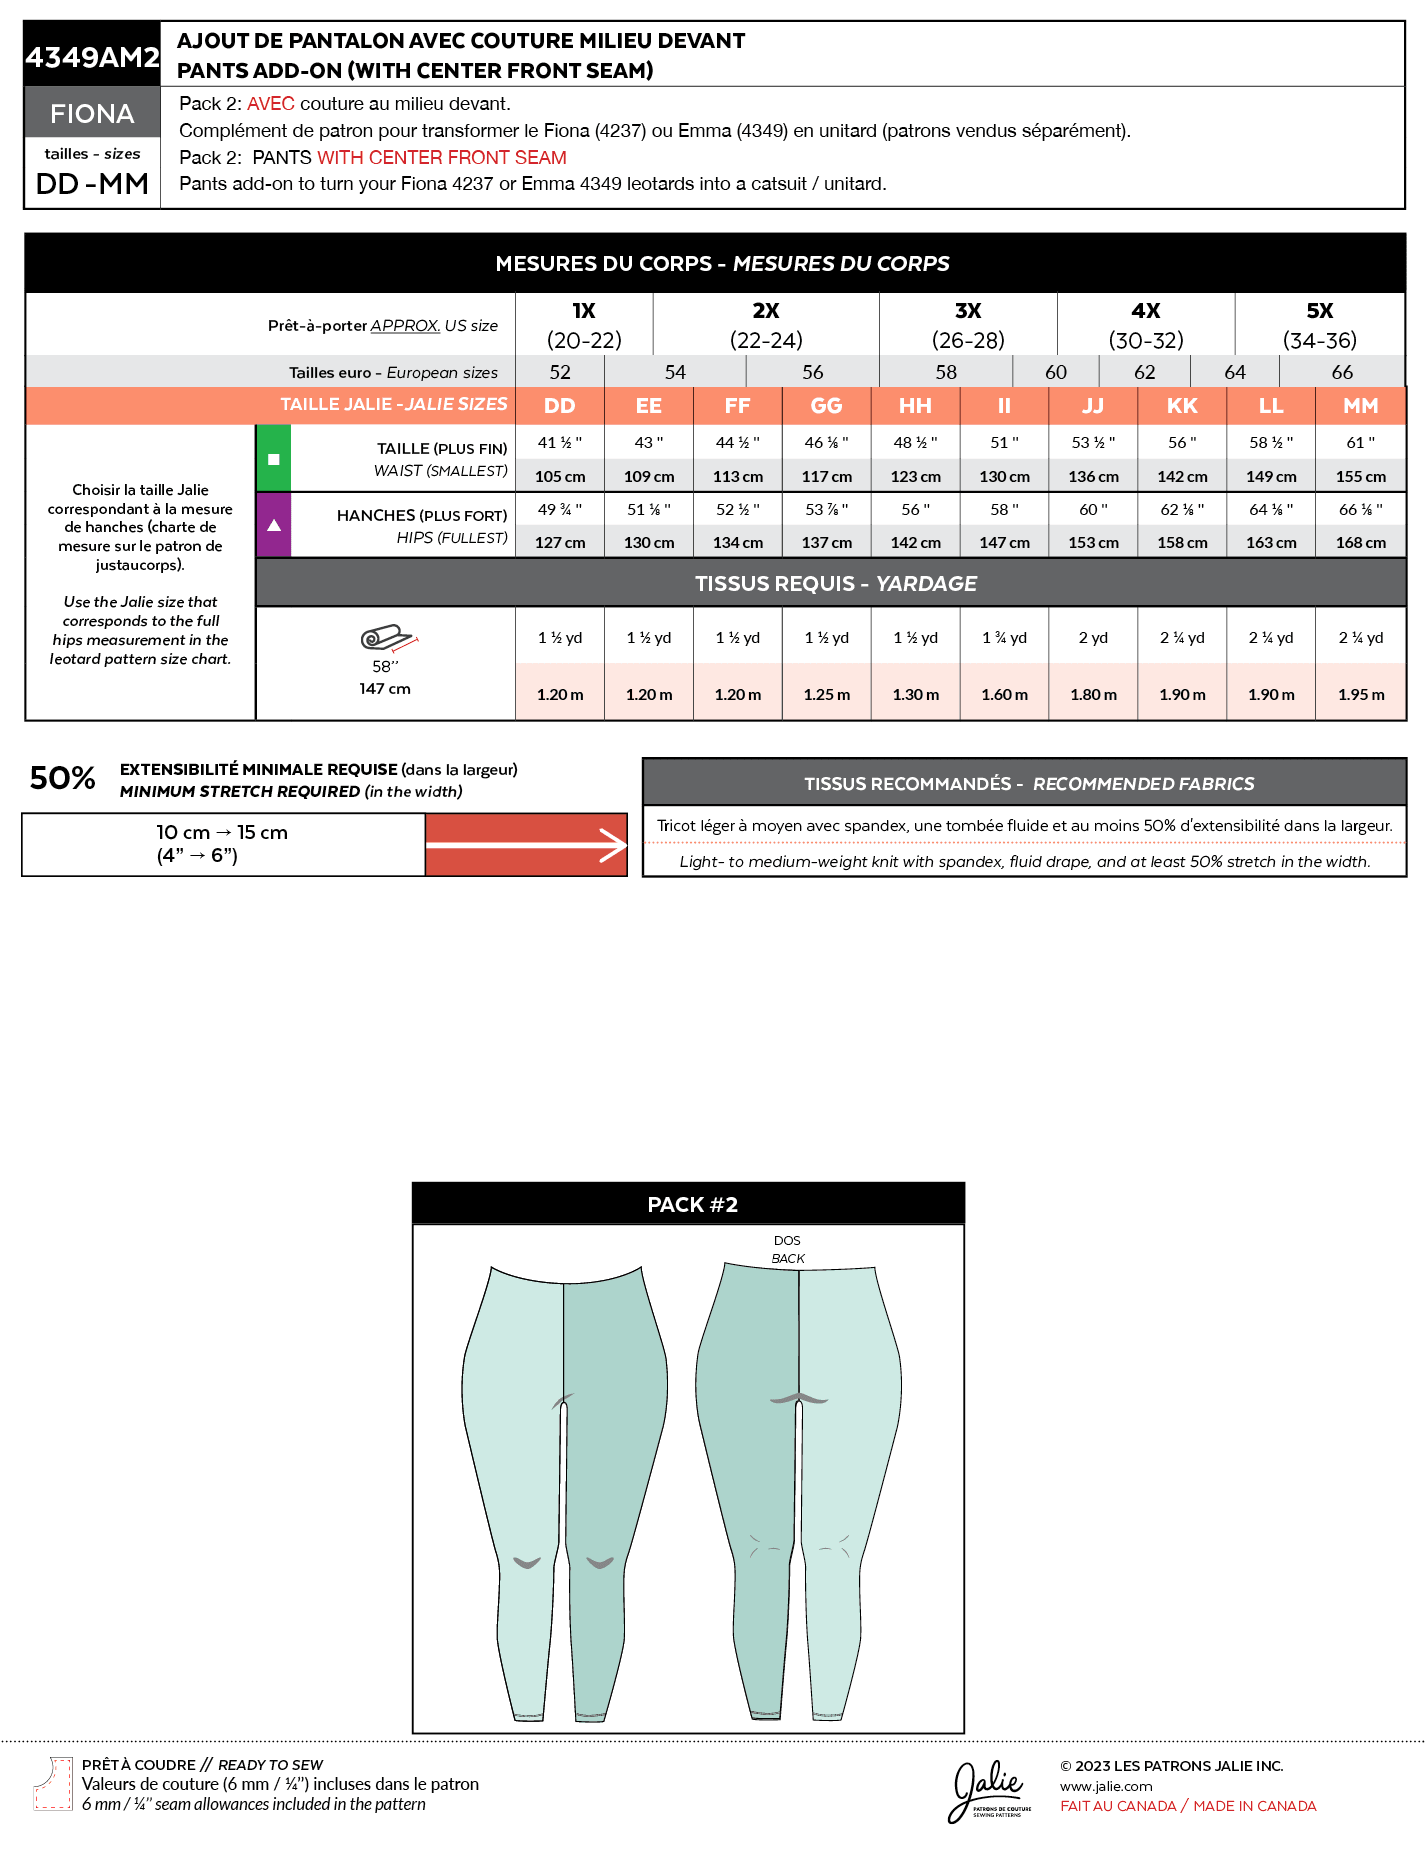 4349a // Pants add-ons for the FIONA and EMMA leotards - Jalie